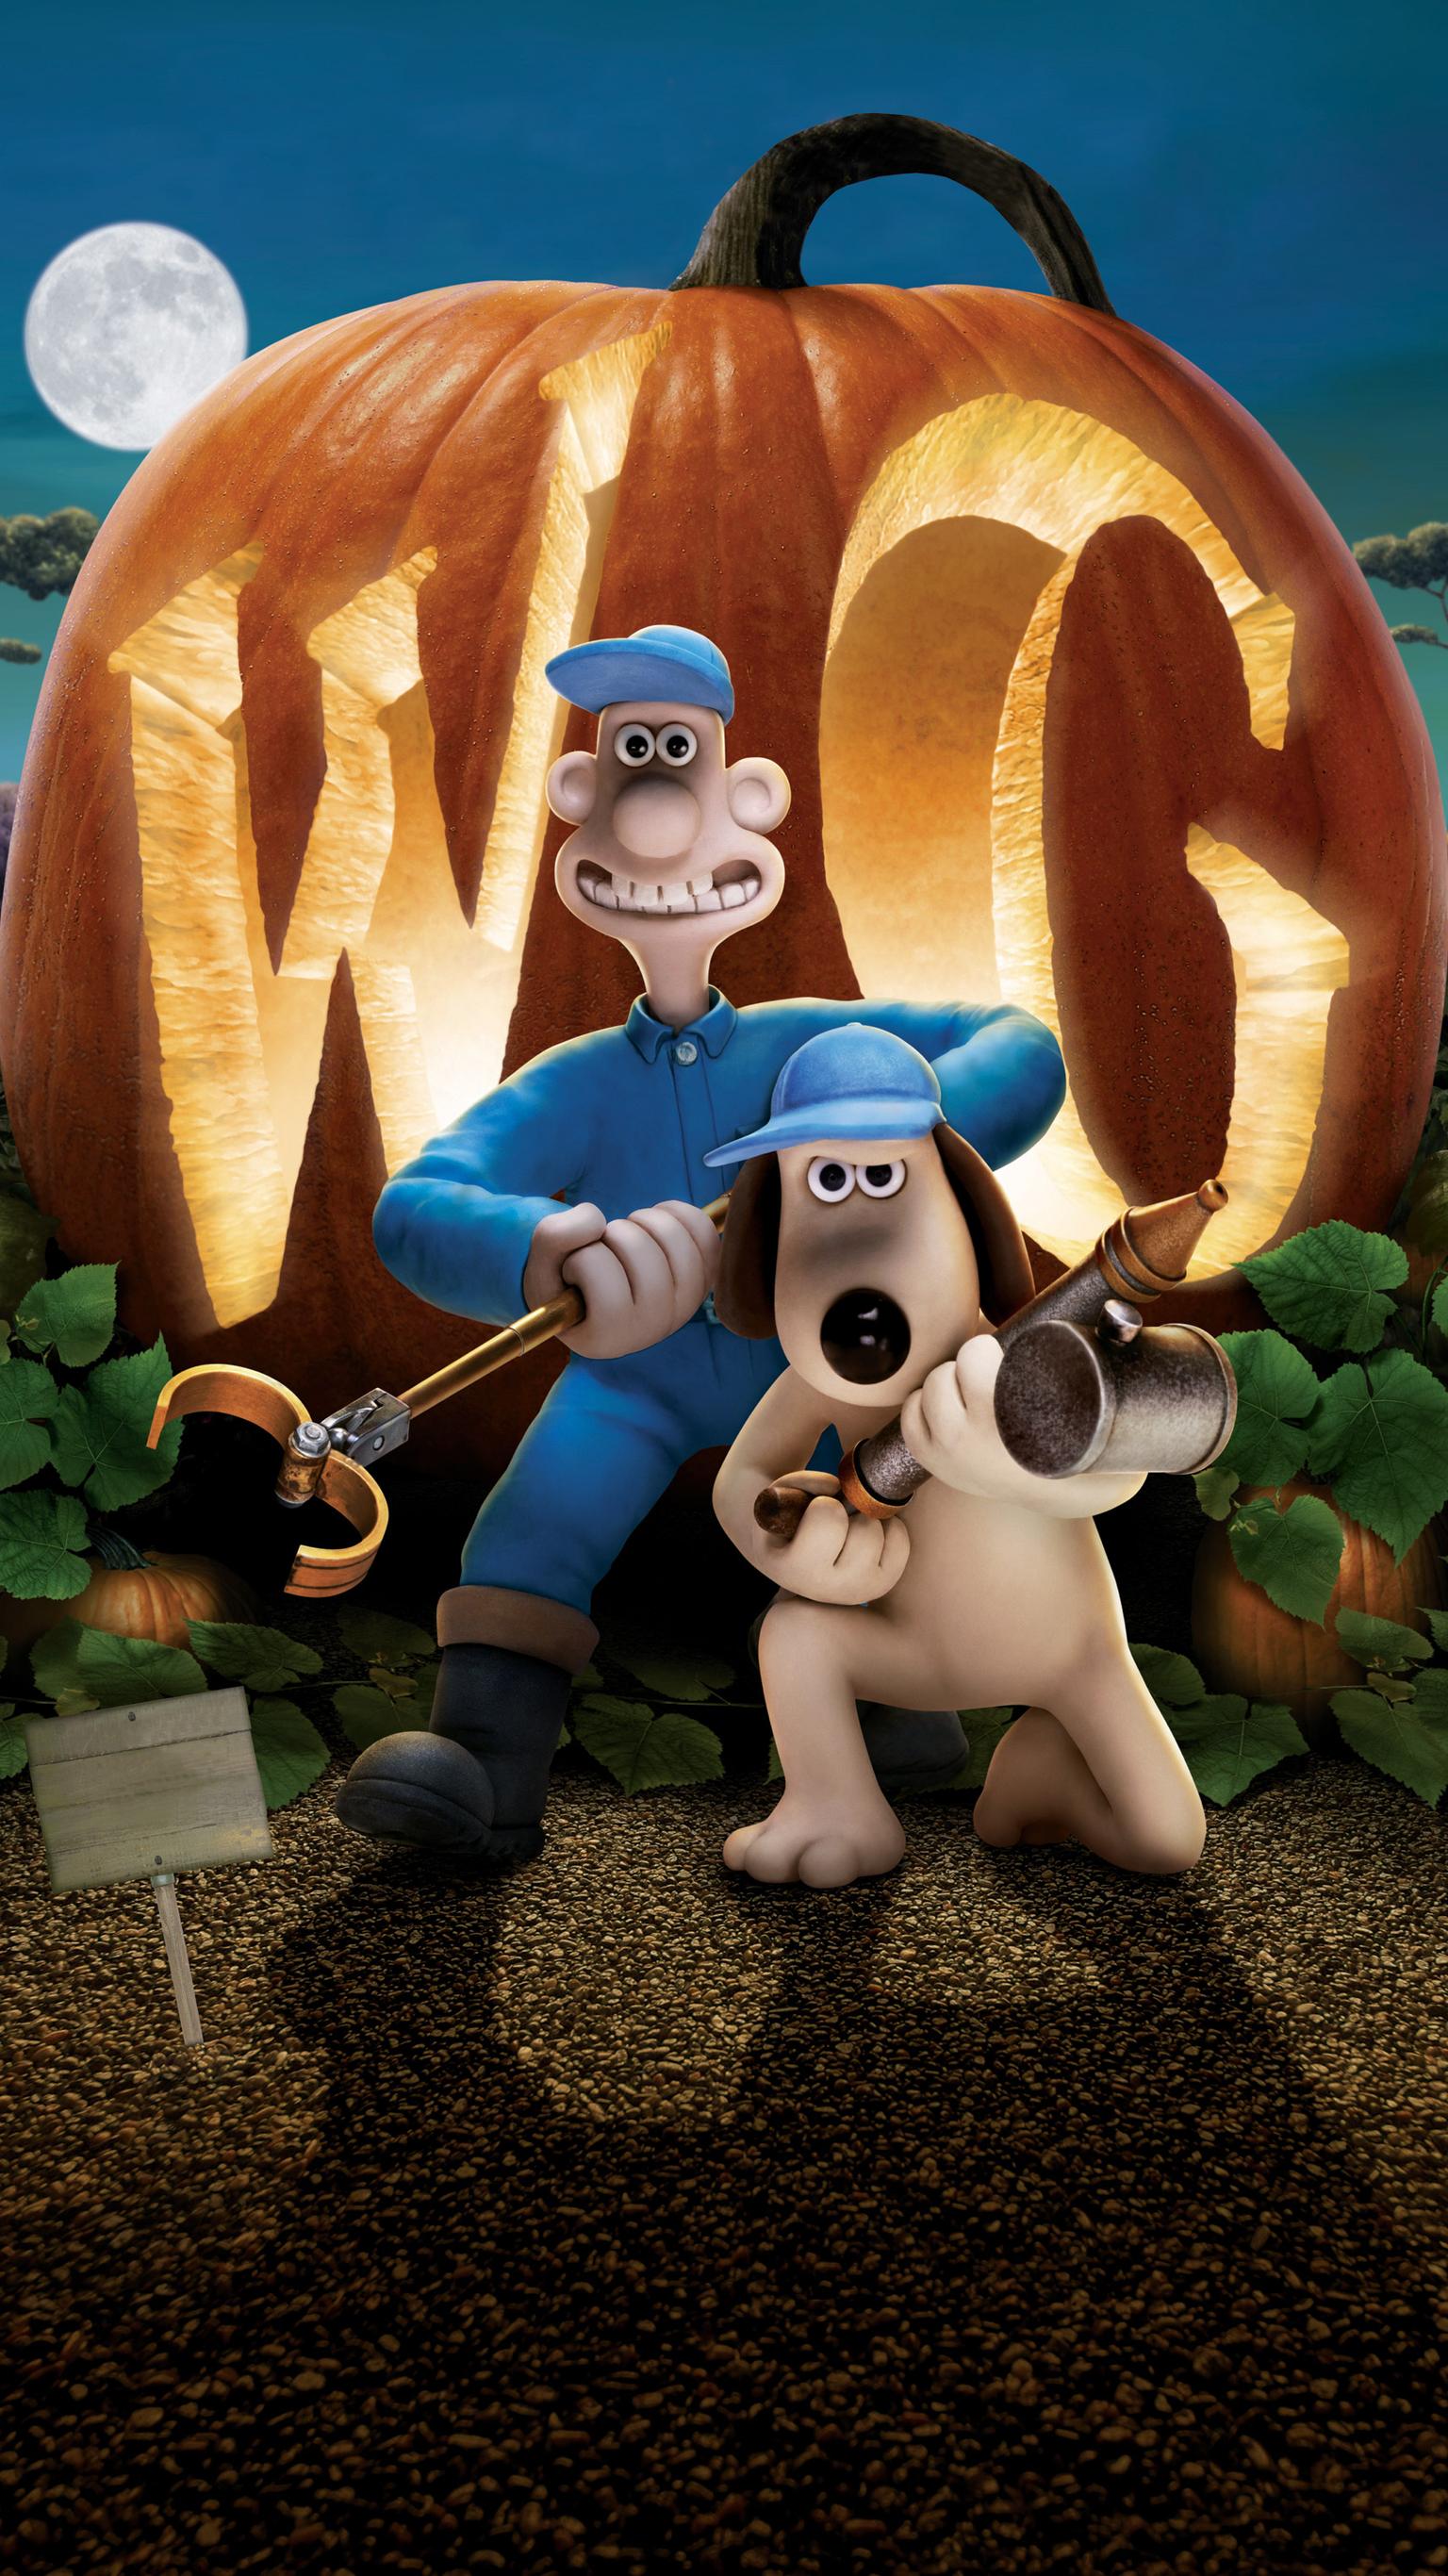 Wallace Gromit The Curse of the Were Rabbit 2005 Phone 1536x2732